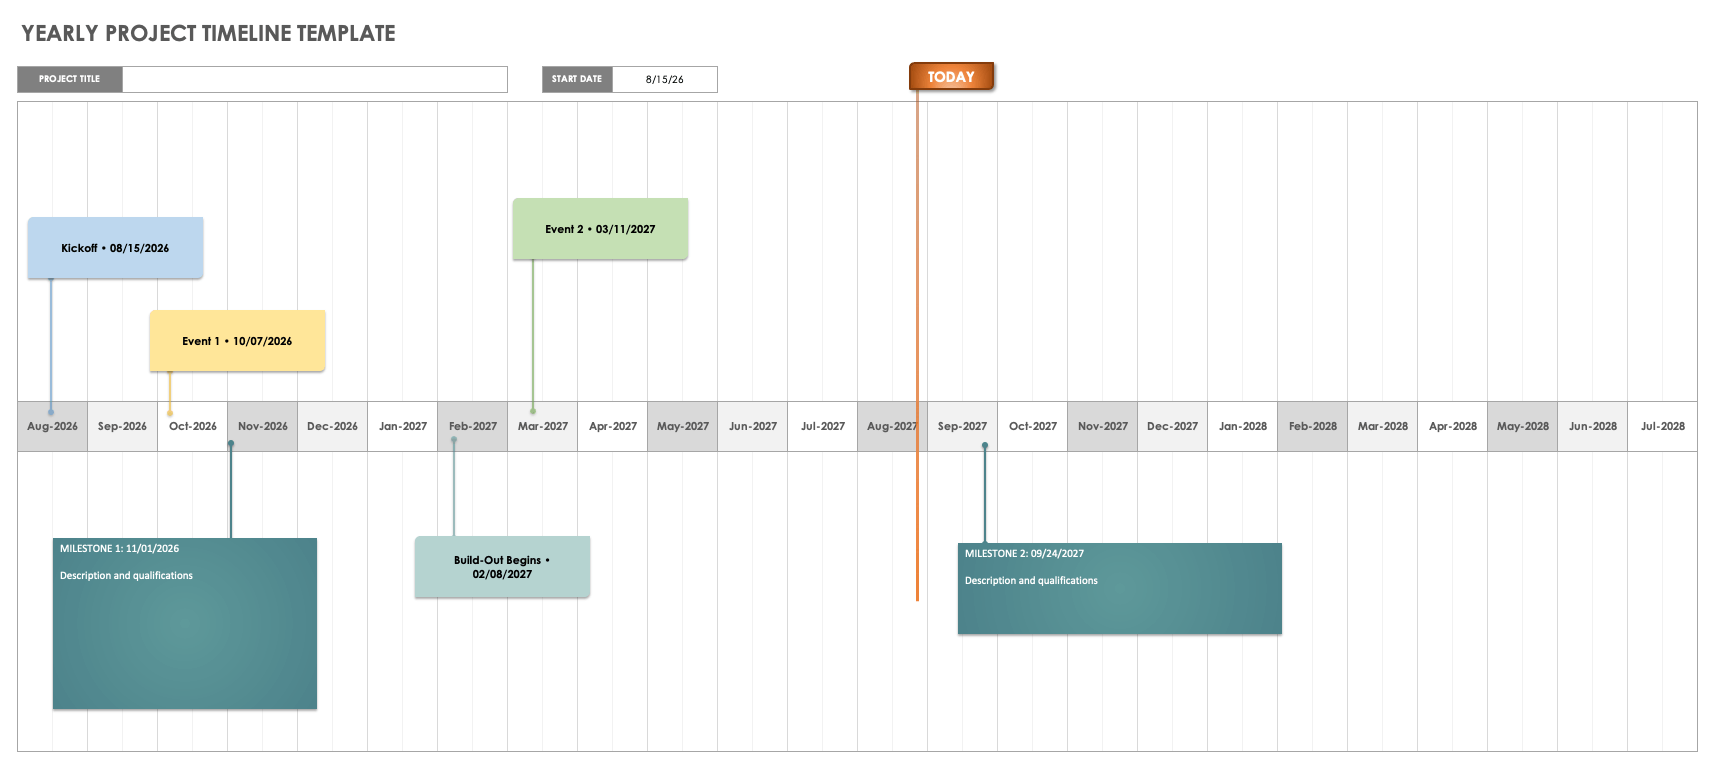 Yearly Project Timeline Template Excel